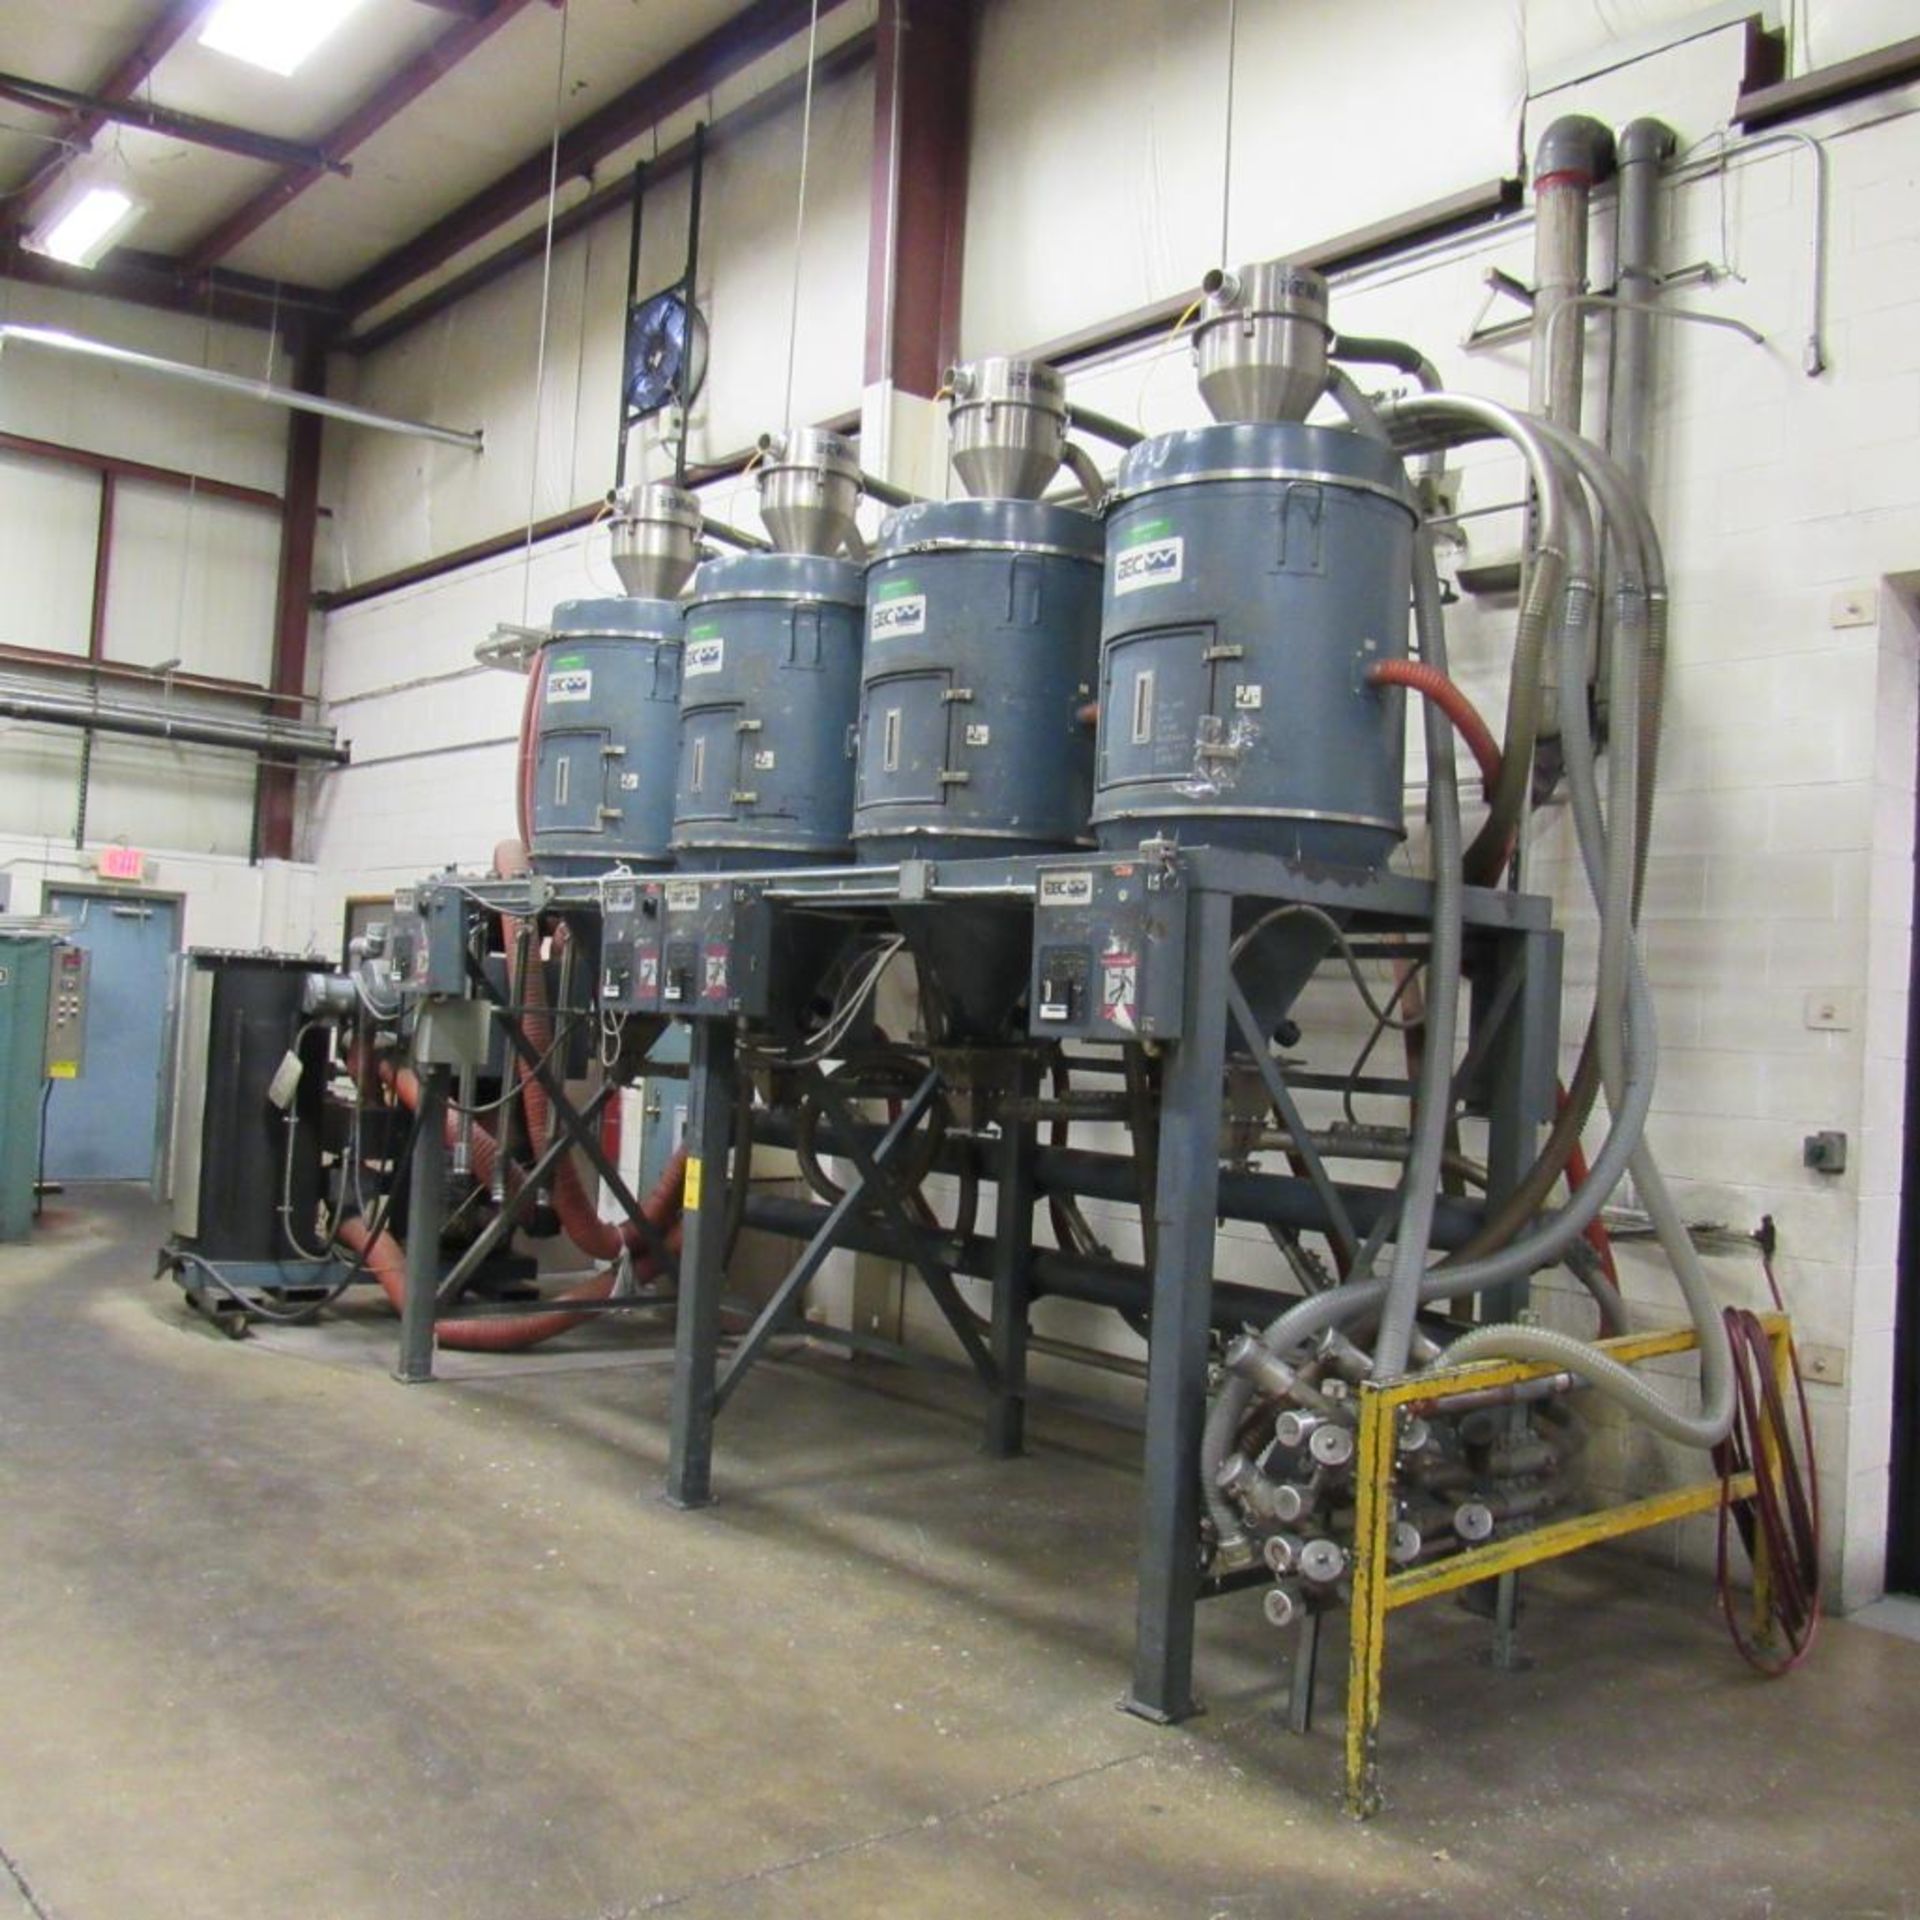 AEC Whitlock WD-600 CHEQ Dryer w/(4) DH-170 MICHEQ Hopper Dryers (Location: Bldg. 1) - Image 5 of 10